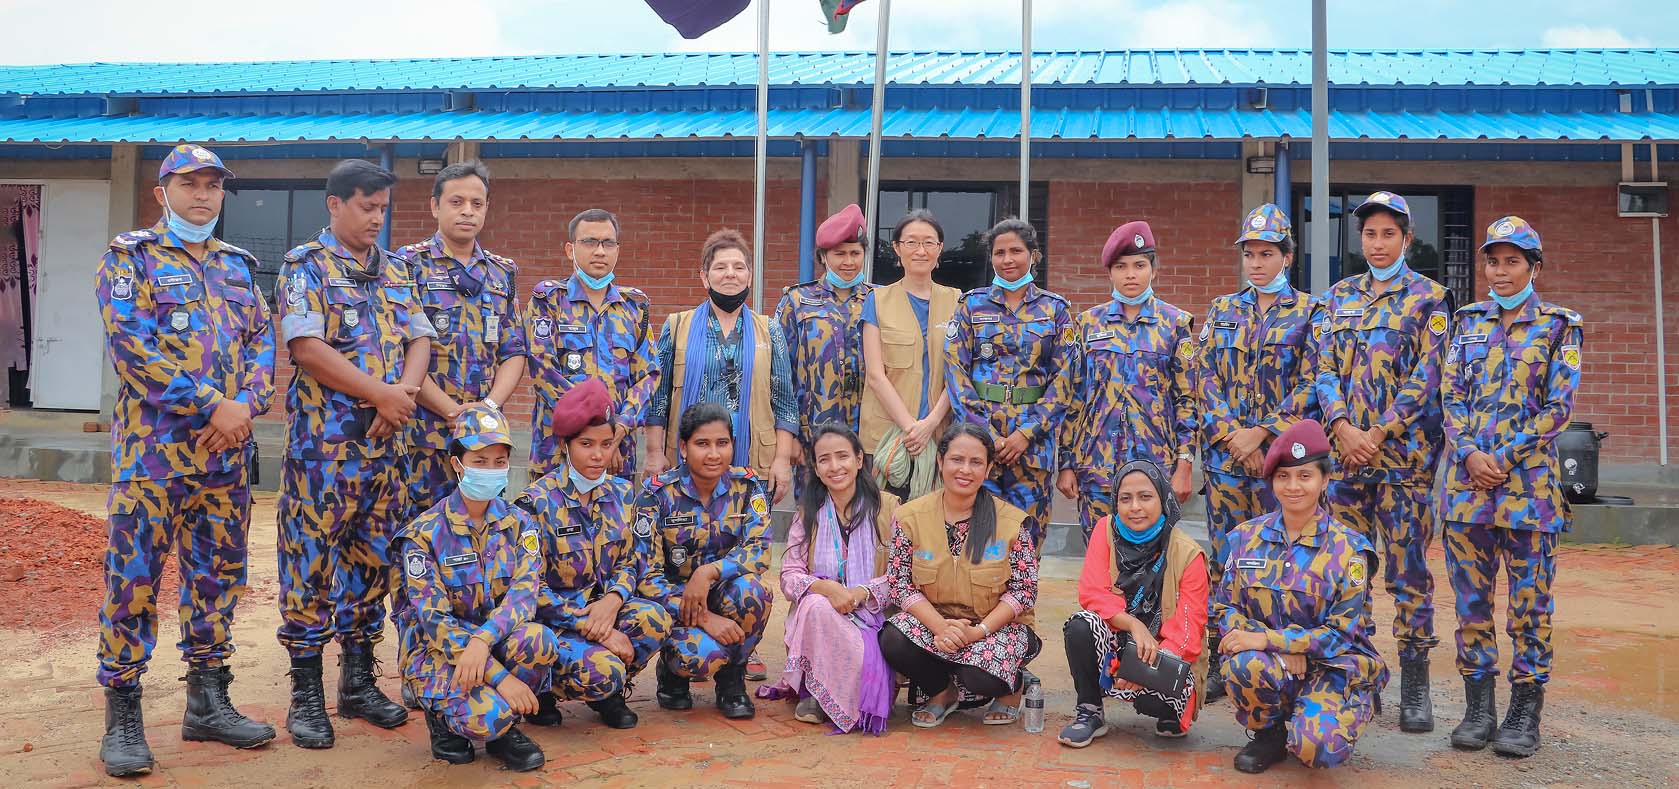 UN Women works with the Bangladesh Armed Police Battalions that serve Cox’s Bazar refugee camp. The battalions are committed to providing tailored policing services to the Rohingya community and addressing the specific needs of women and girls. Photo: UN Women